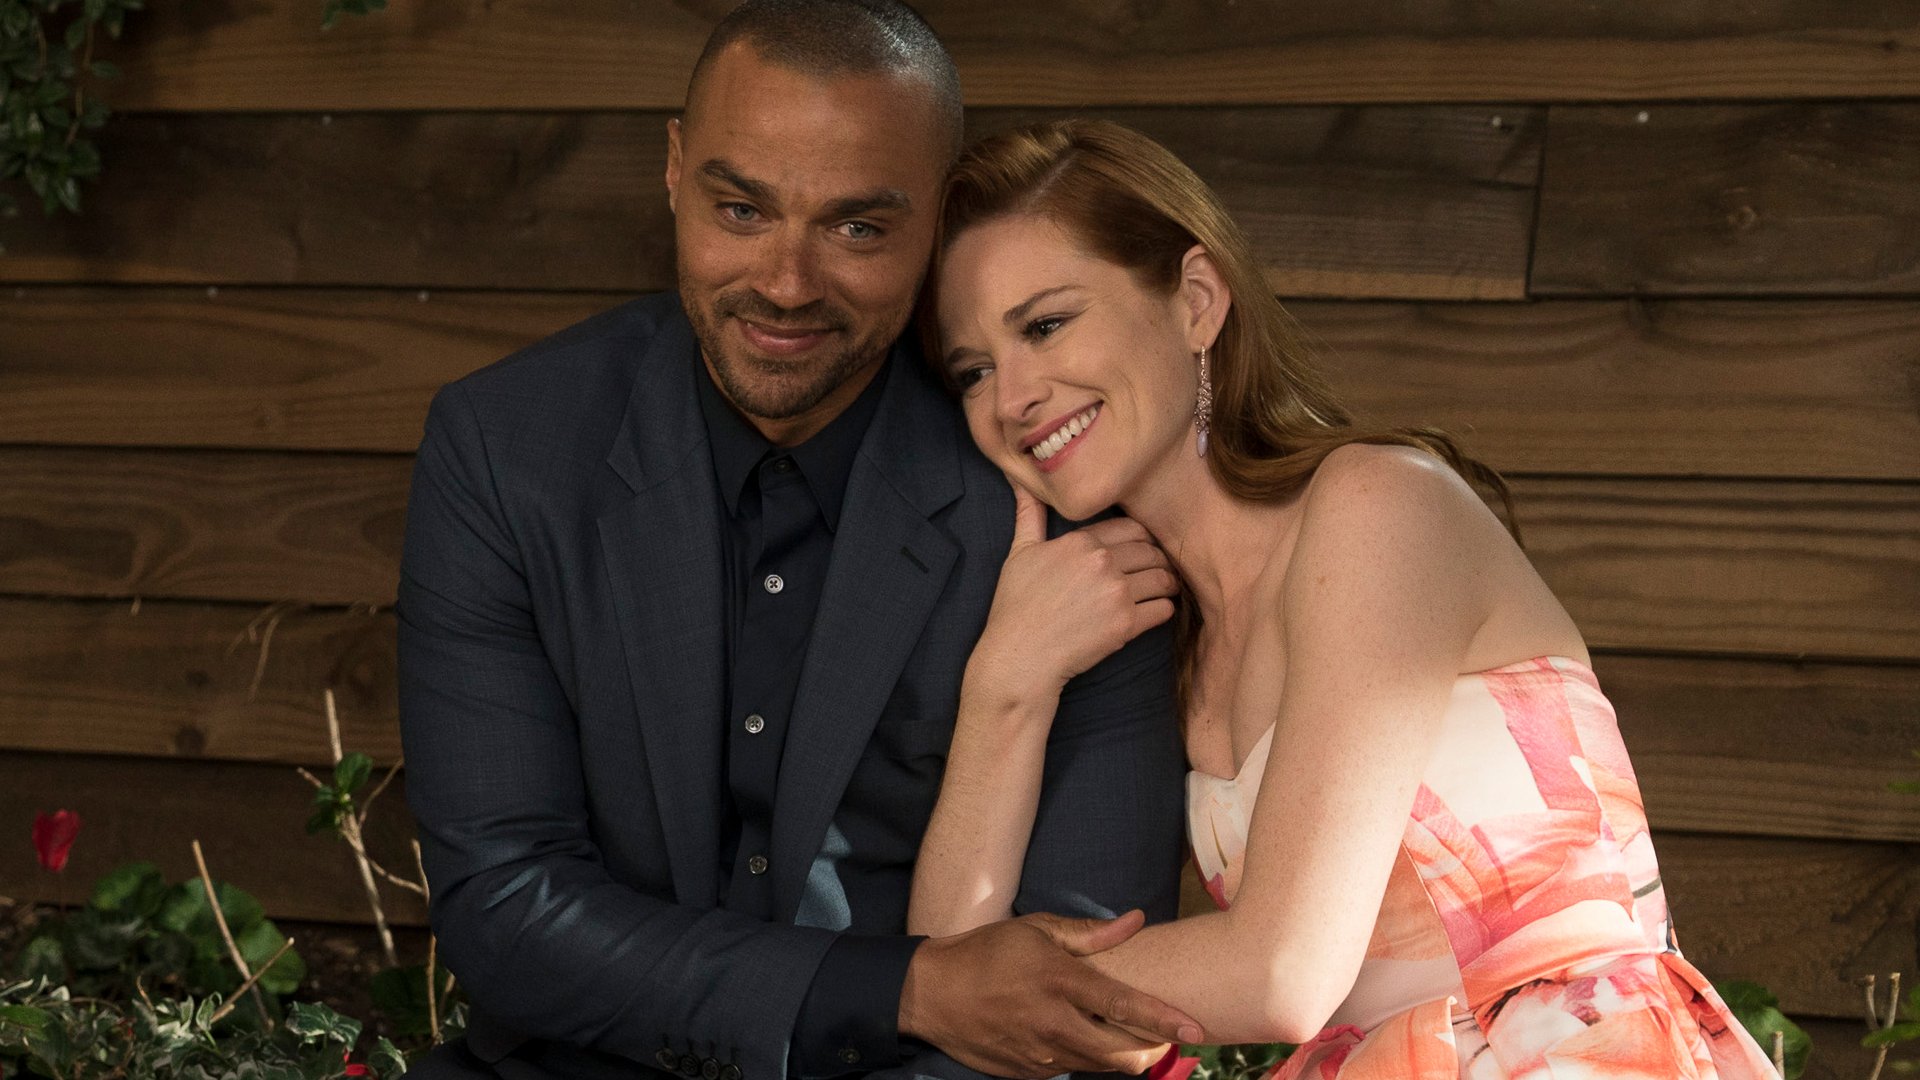 Jesse Williams as Jackson Avery and Sarah Drew as April Kepner hugging at the wedding in the 'Grey's Anatomy' Season 14 finale.